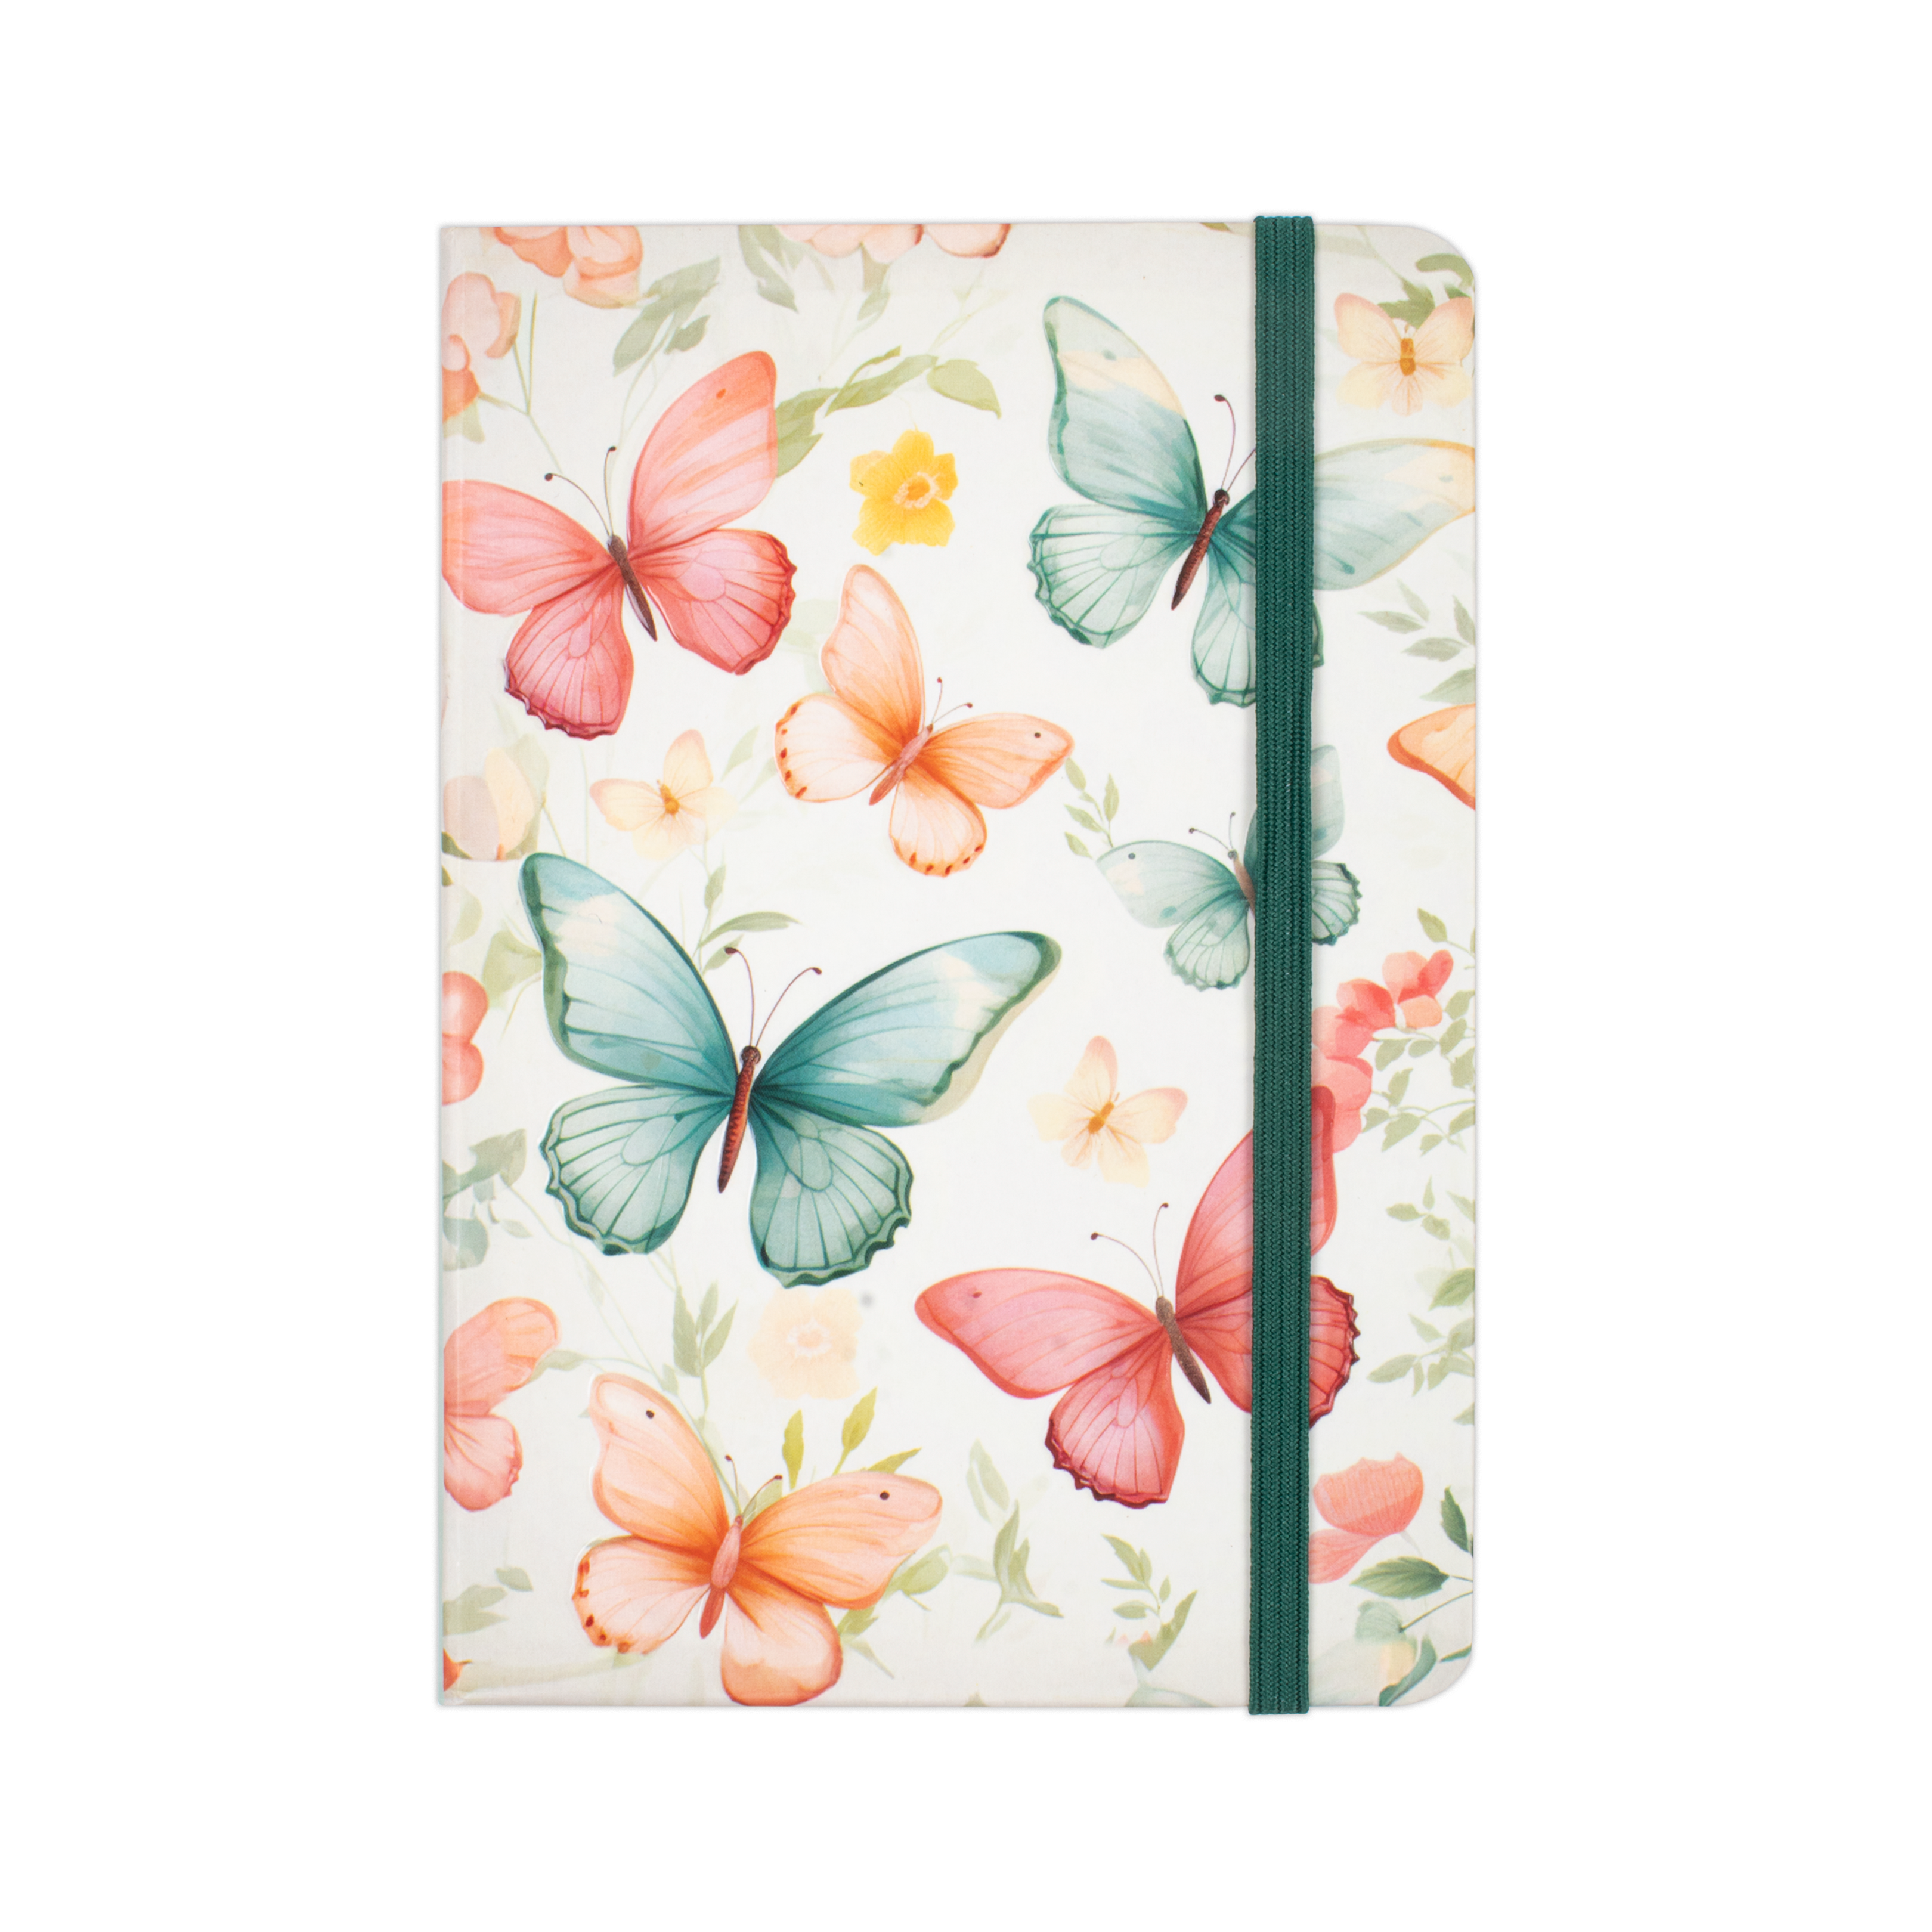 Hardbound Ruled Notebook Butterfly Garden Edge Printed With Elastic Band A6 192pages 100gsm